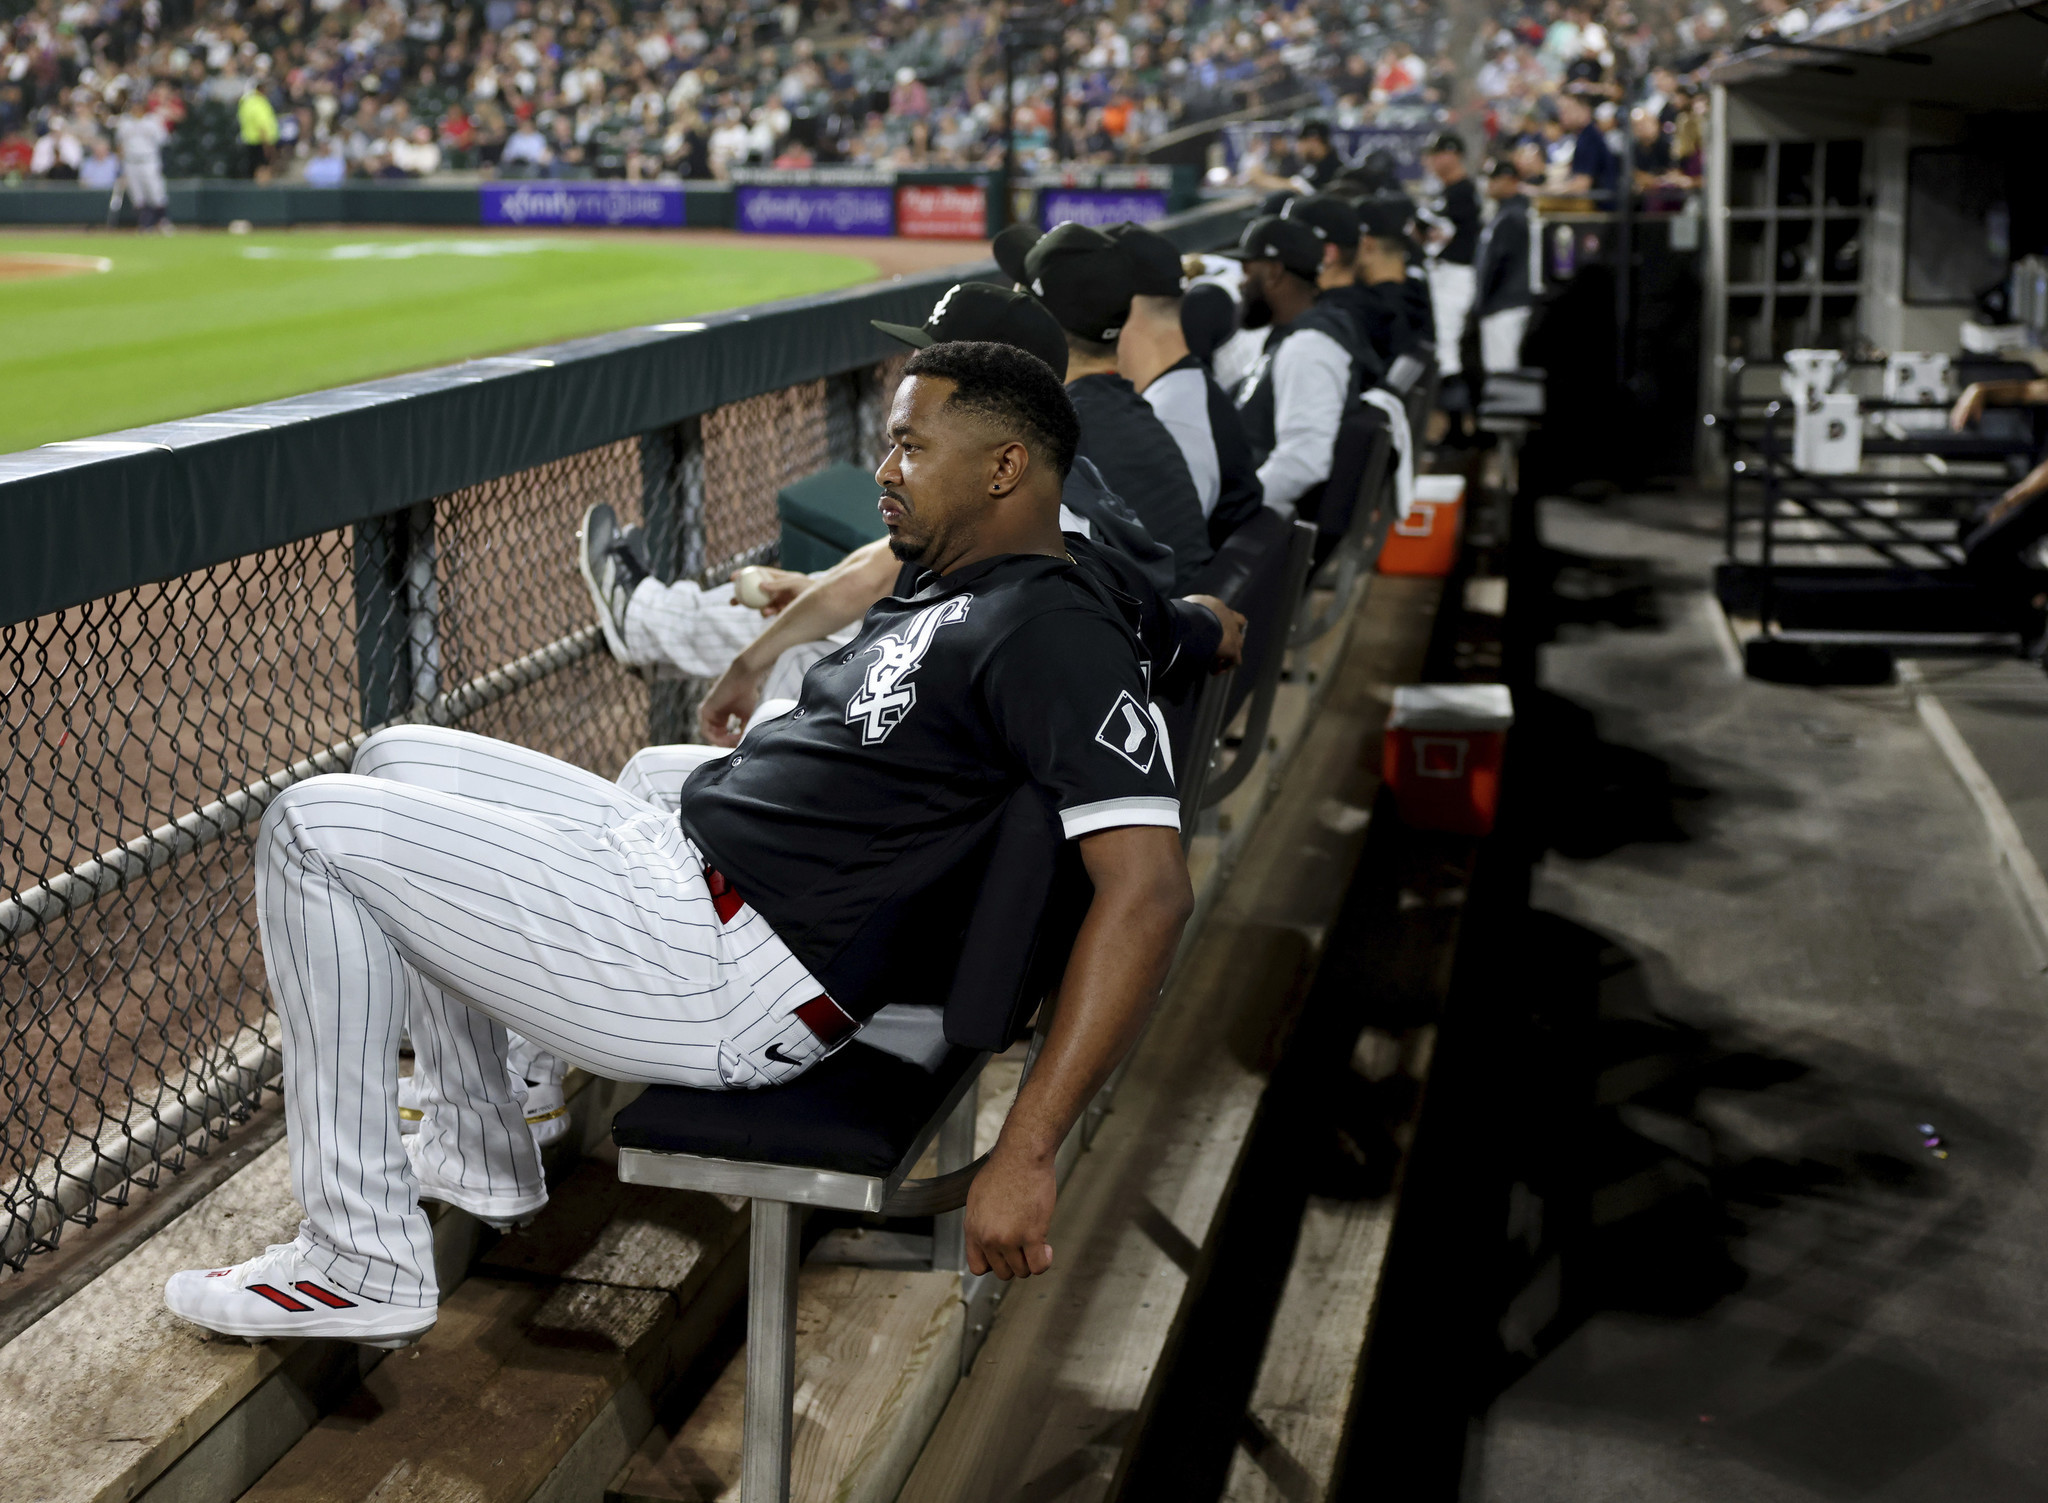 The White Sox are about to have a make-or-break month: Chicago